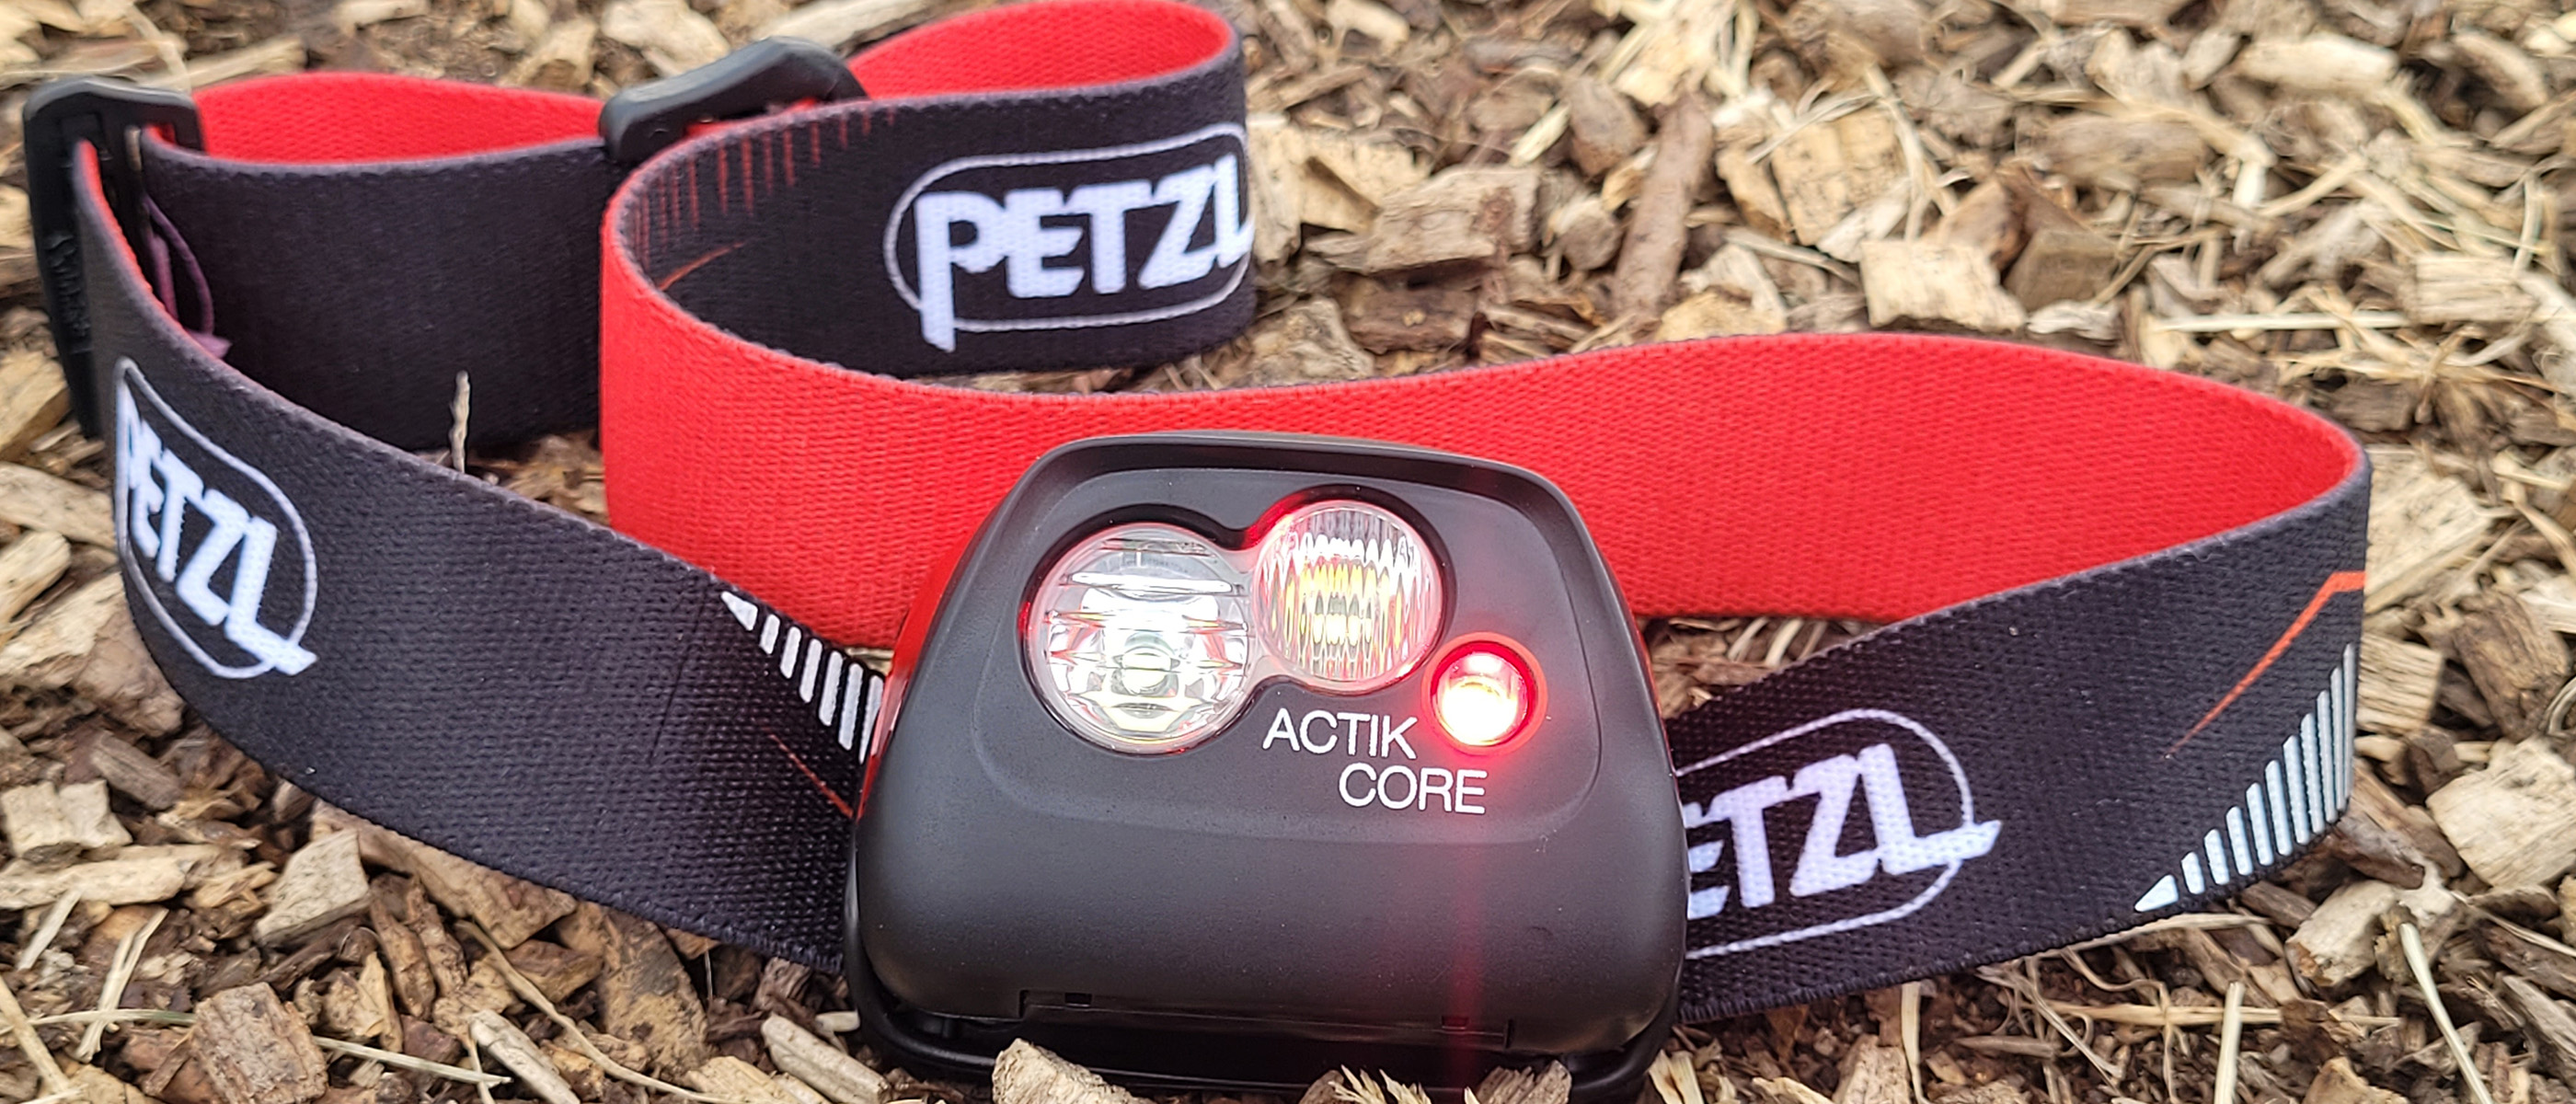 Petzl ACTIK CORE Headlamp - Rechargeable, Compact 450 Lumen Light with Red  Lighting for Hiking, Climbing, and Camping - Black Black (Past Season)